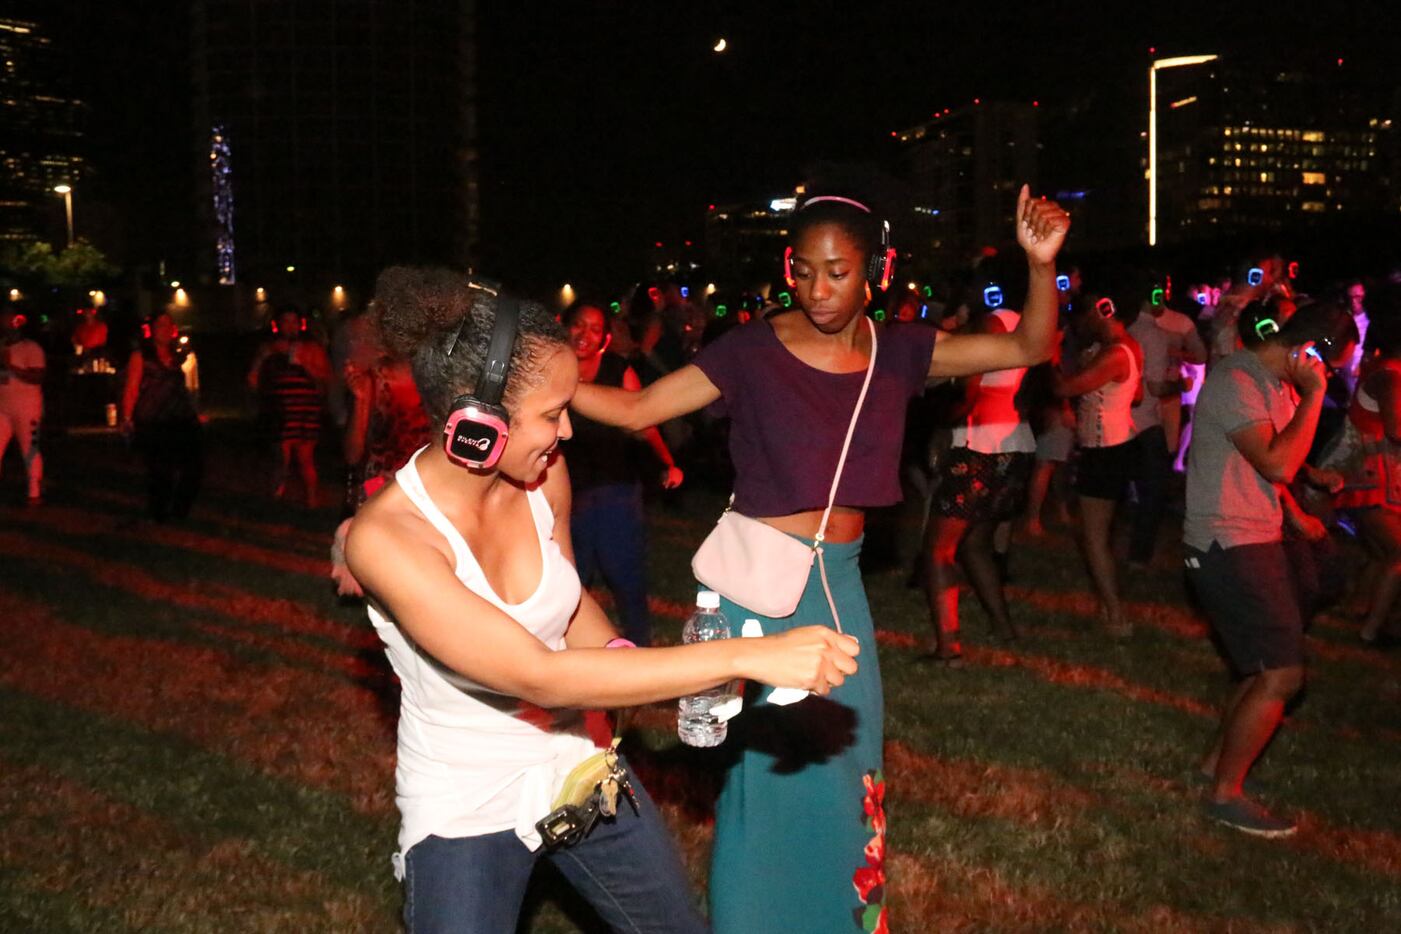 Pin Drop Disco on Saturday at Strauss Square in downtown Dallas featured DJs Spinderella,...